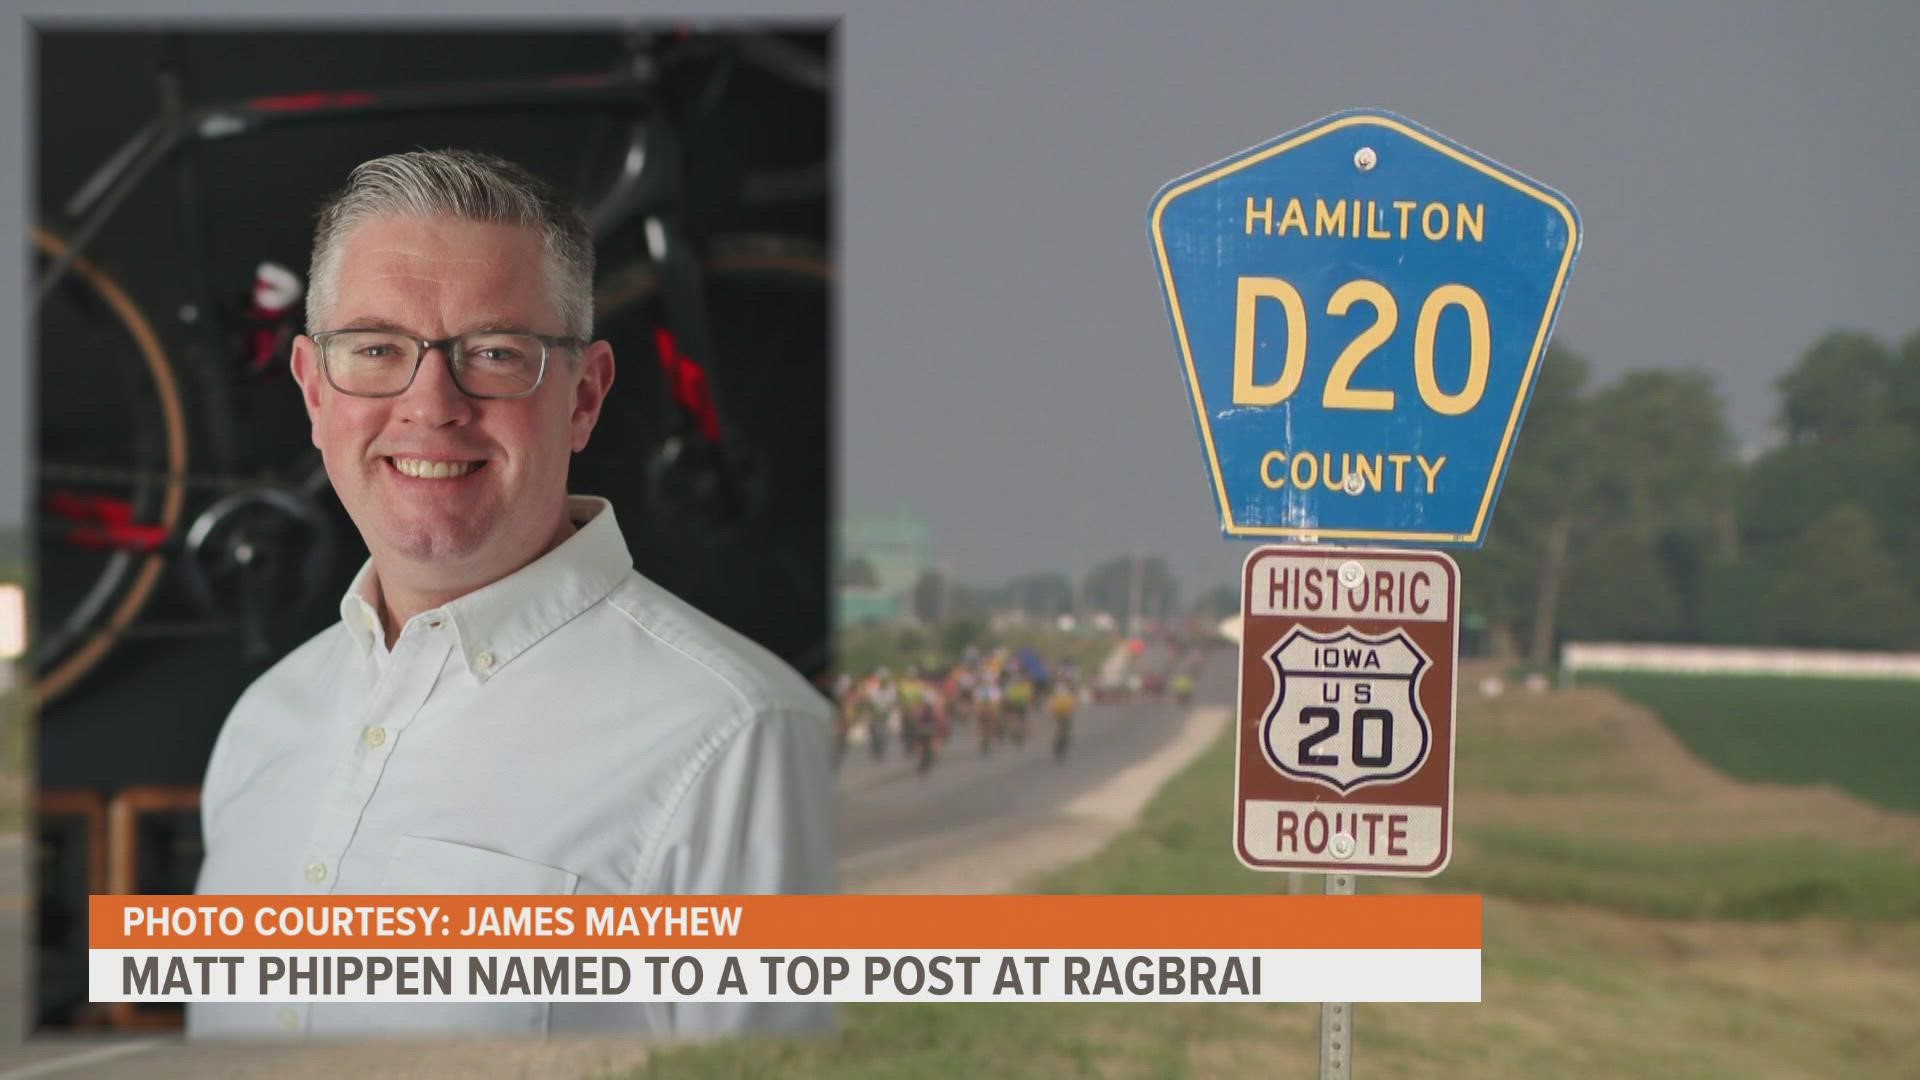 Matt Phippen has a long association with RAGBRAI, starting in 1990 when his family hosted riders in his front yard.